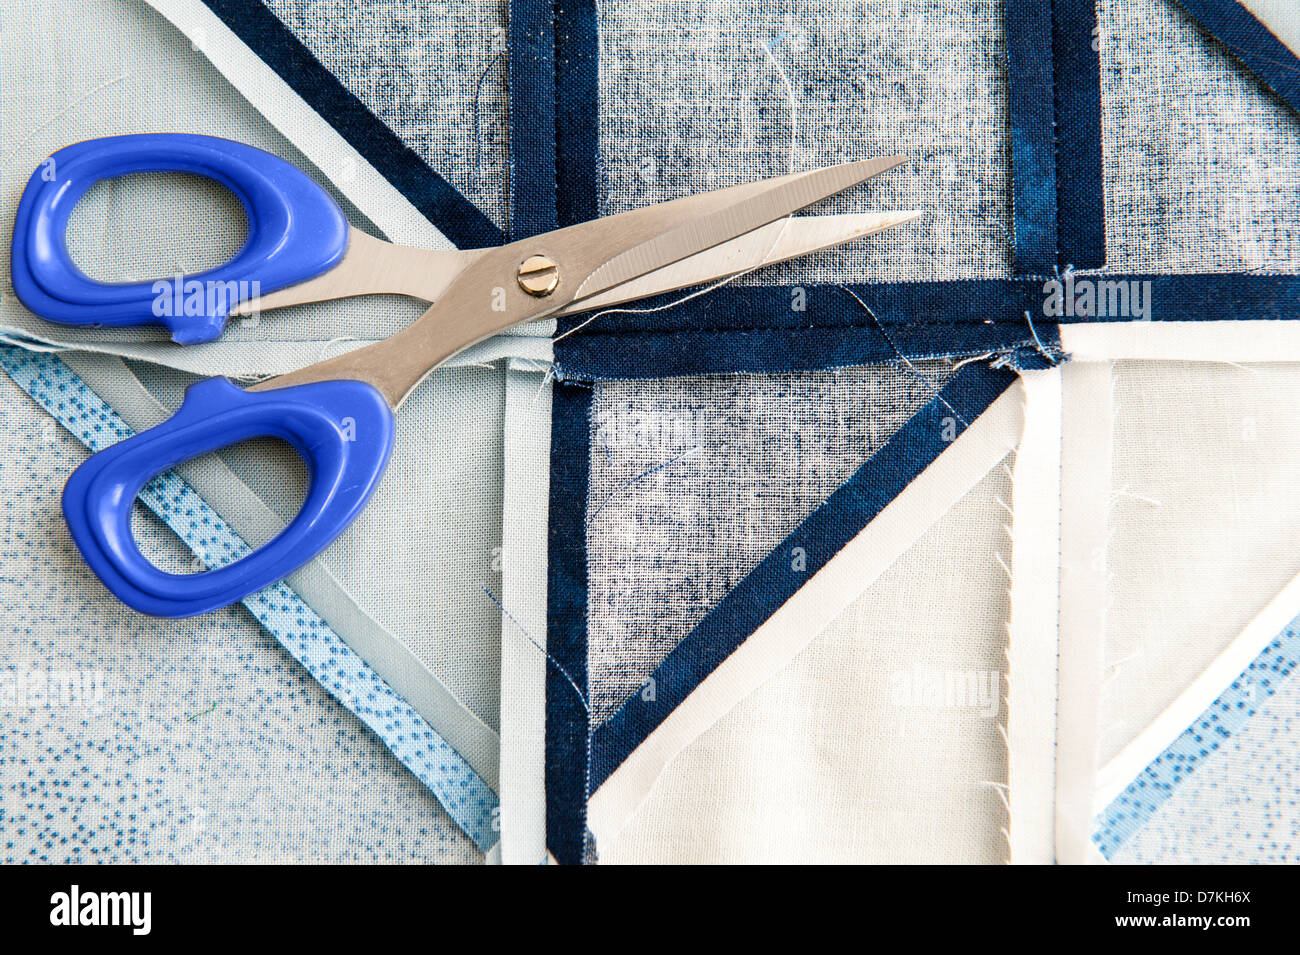 Quilting or patchwork materials and tools with scissors showing blue and white patterned fat quarters Stock Photo